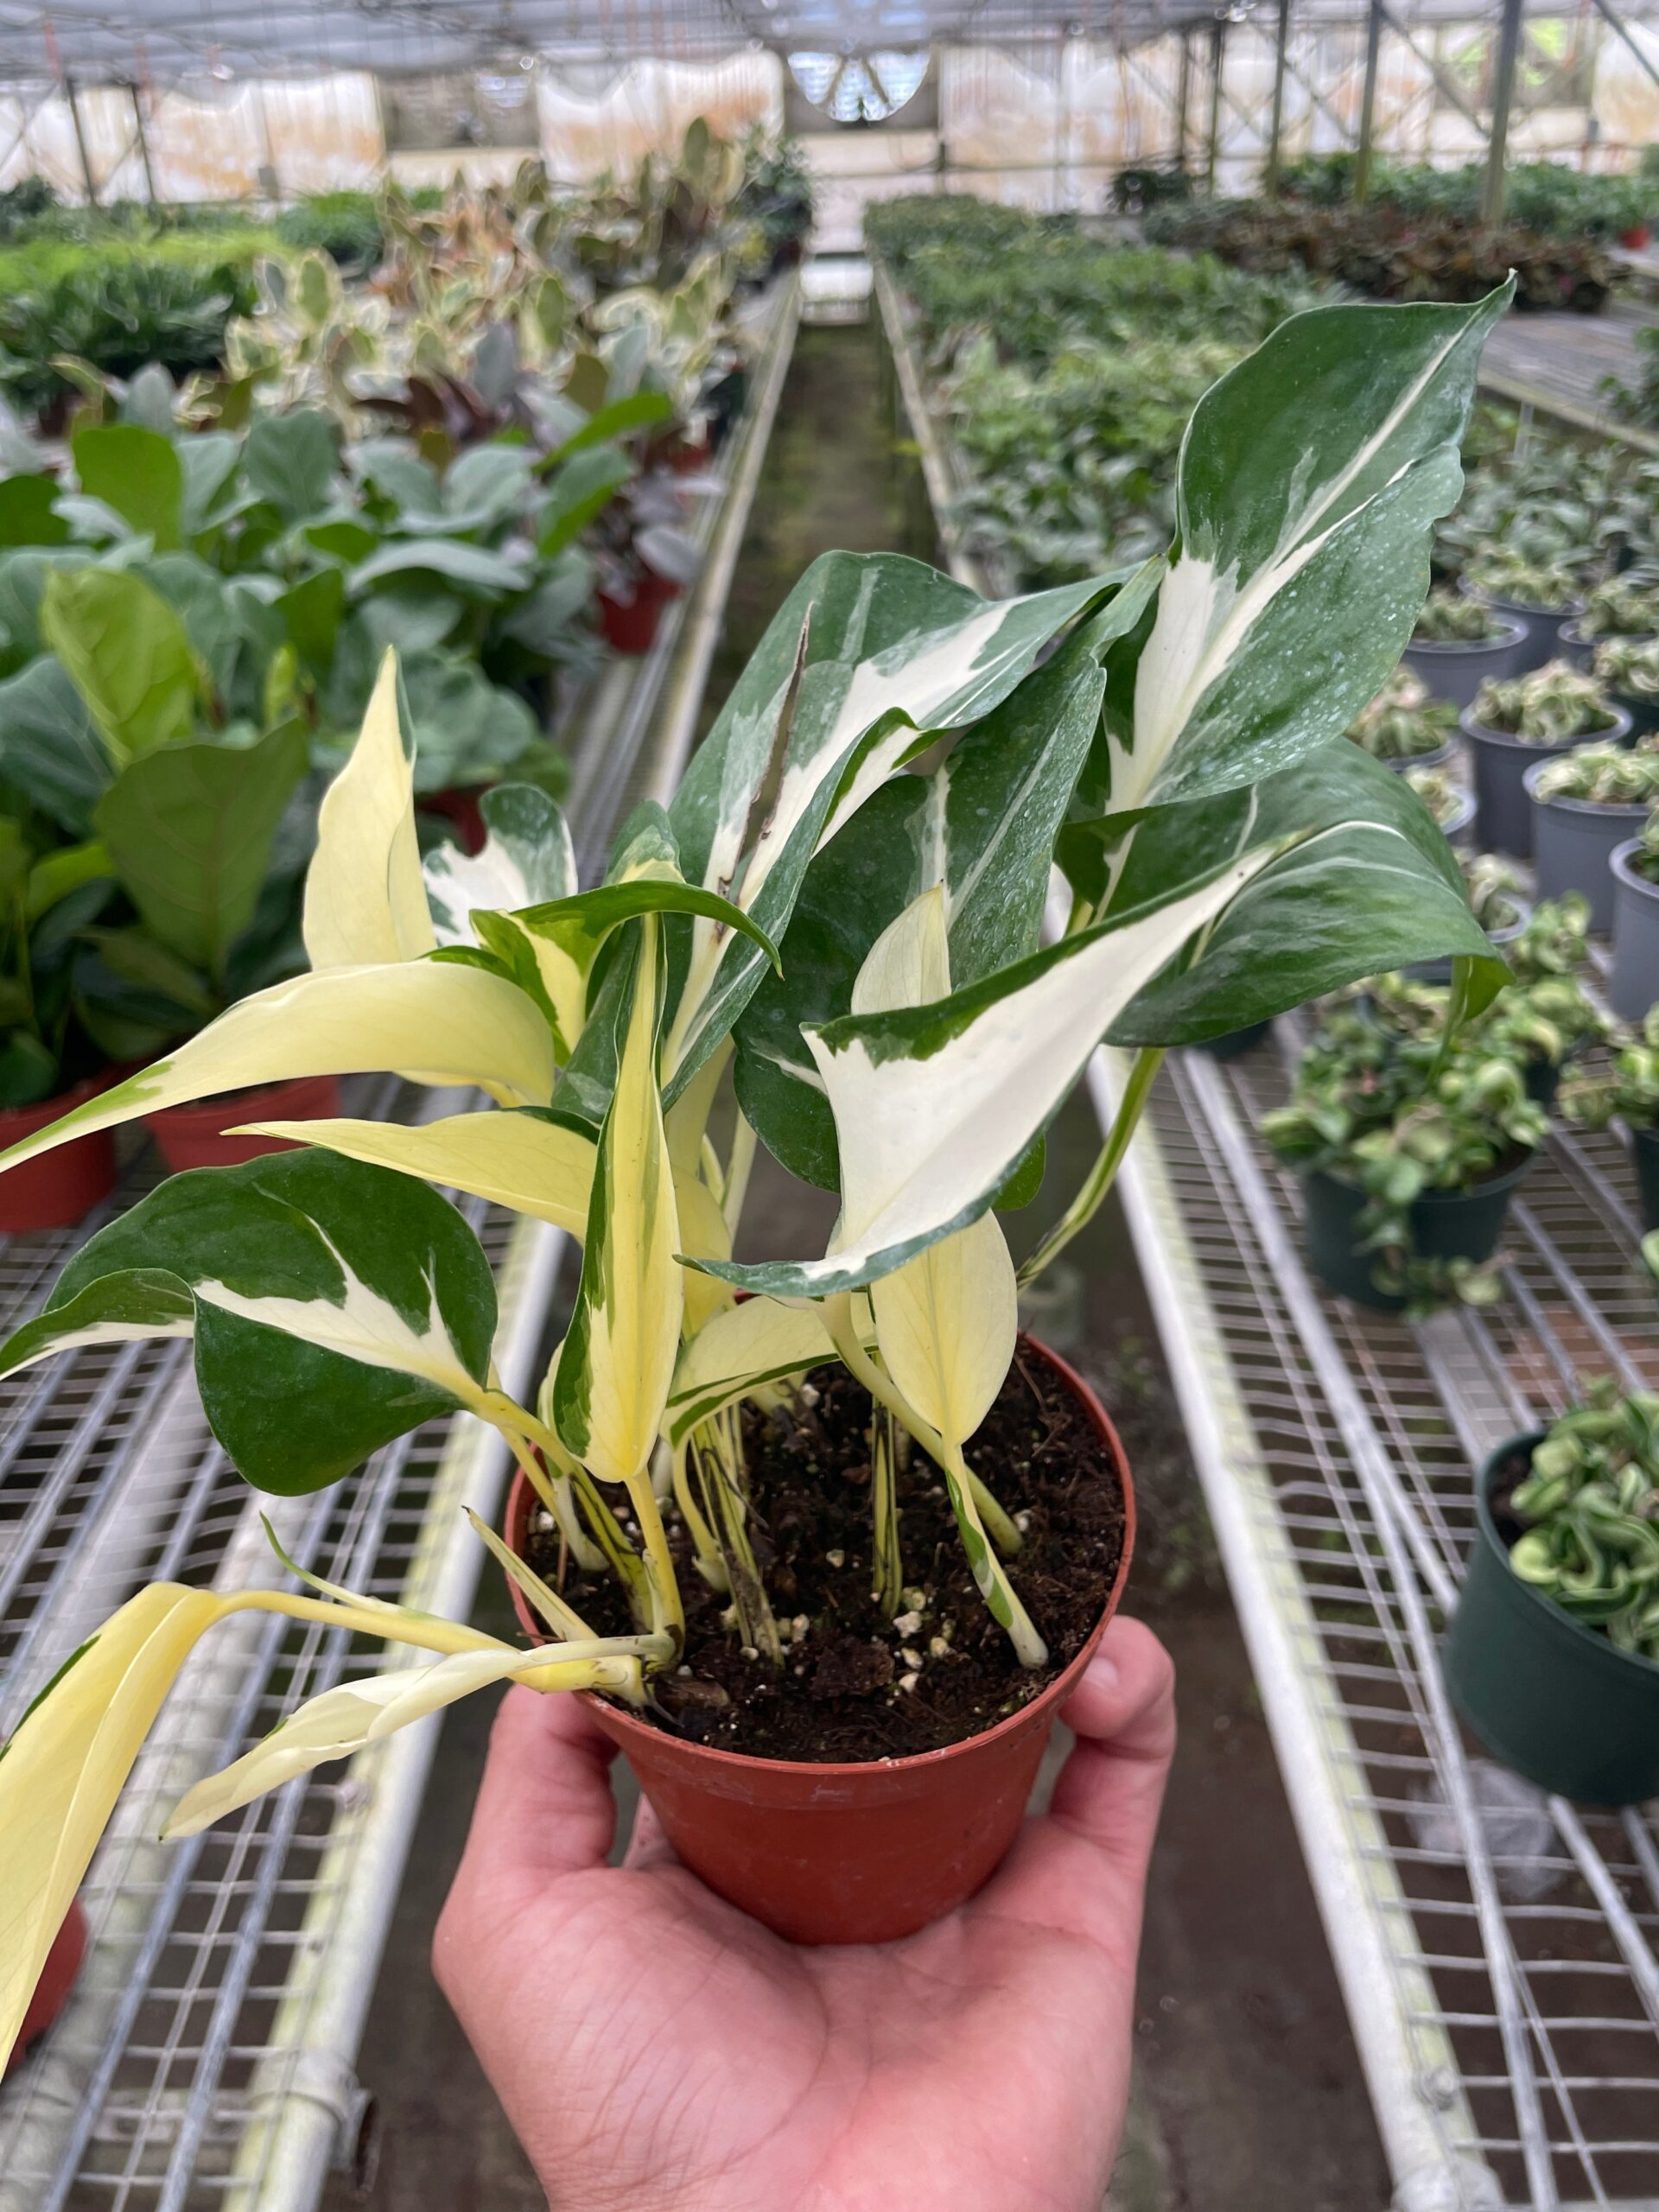 A hand holding a small potted plant with variegated green and white leaves, in the middle of a greenhouse filled with various plants on shelves.